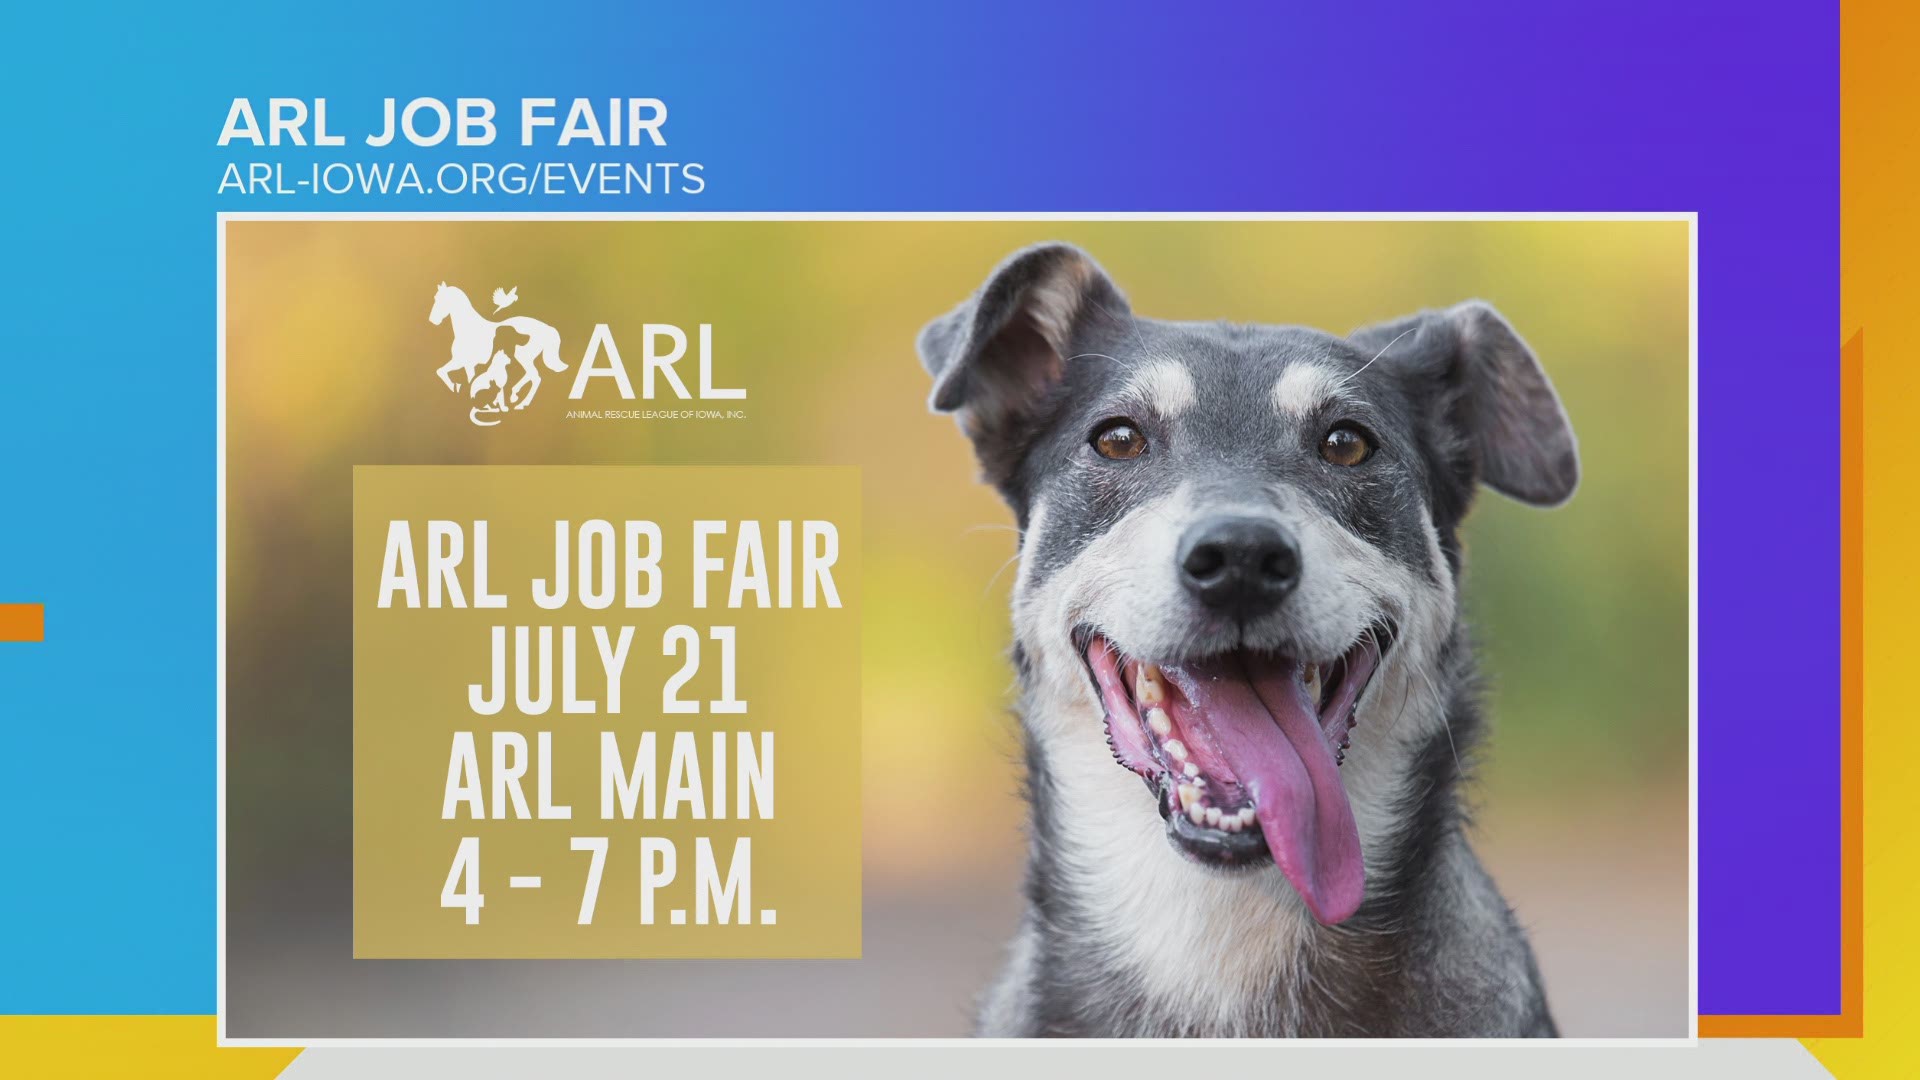 Kathryn Vry, Dog Behavior and Training Assistant, talks about the dog training classes, Home for the Summer & Job Fair being offered at the ARL!